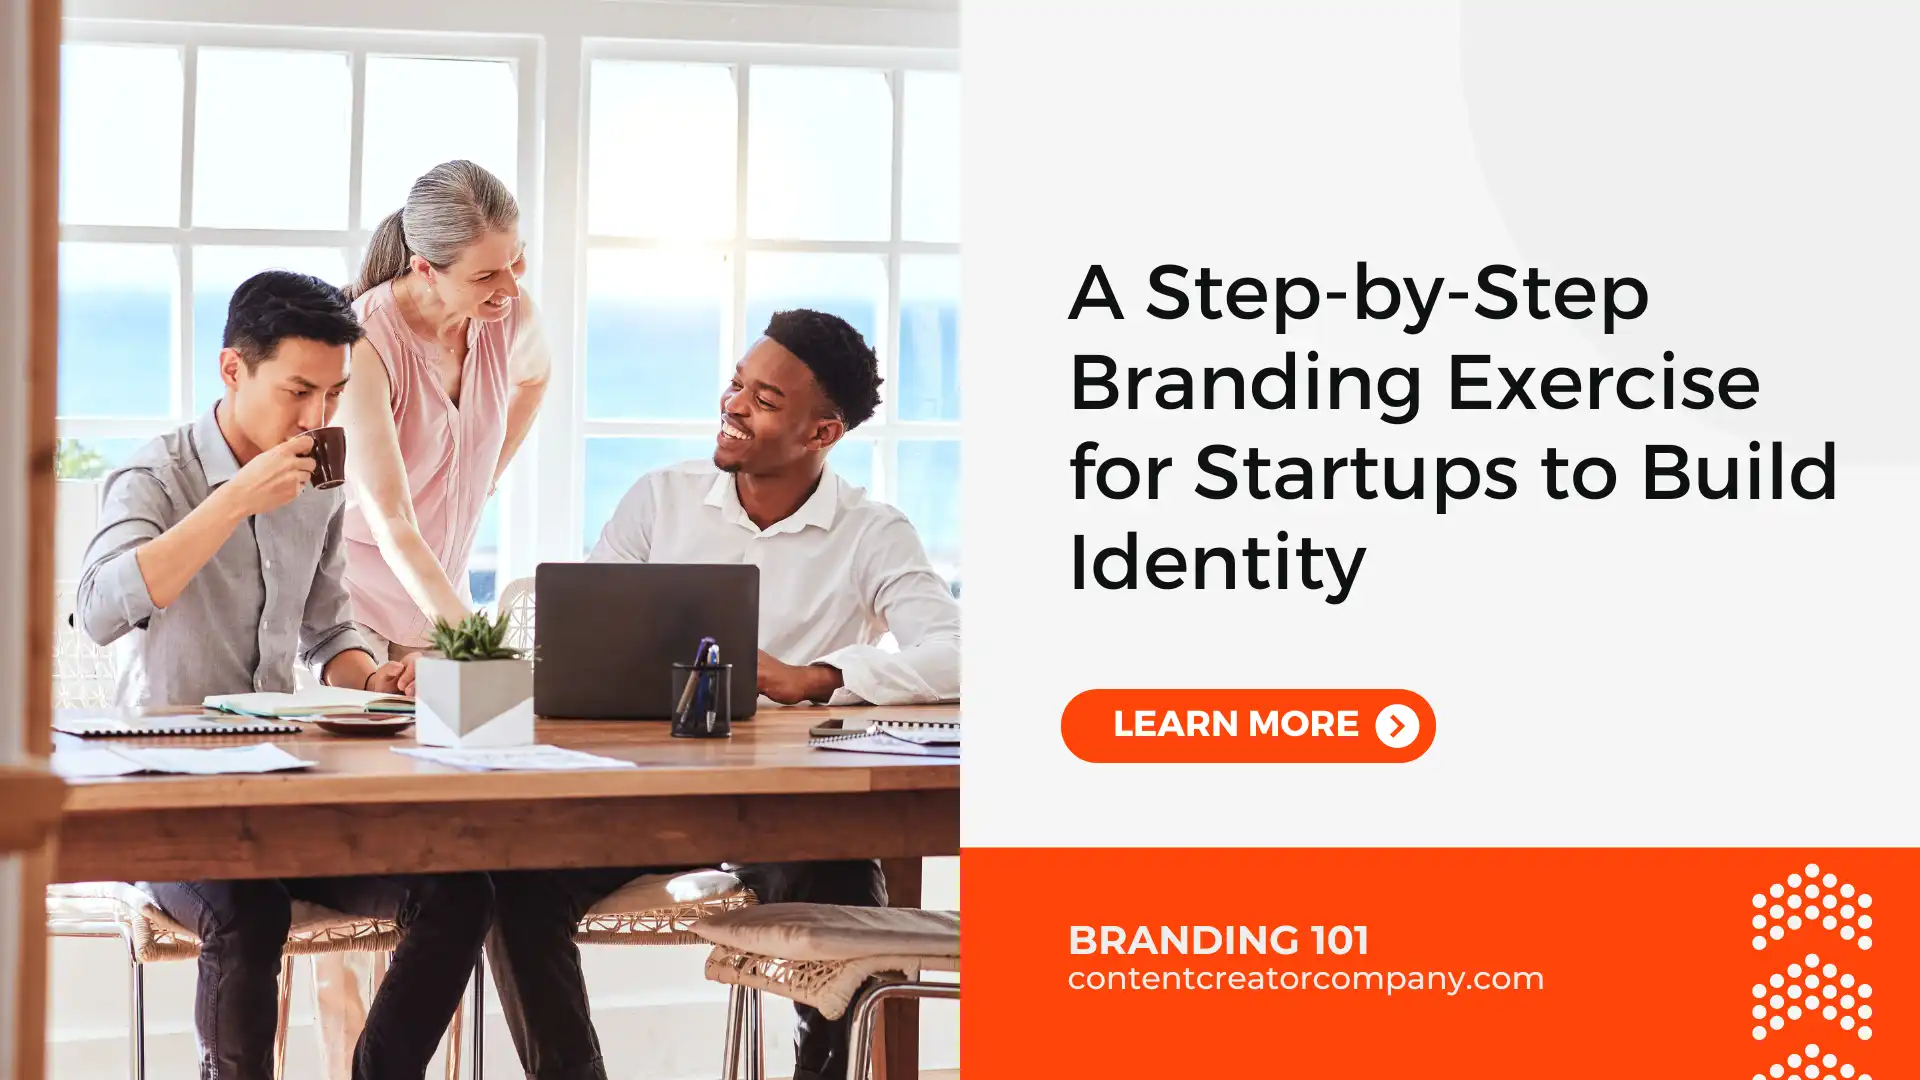 A Step-by-Step Branding Exercise for Startups to Build Identity